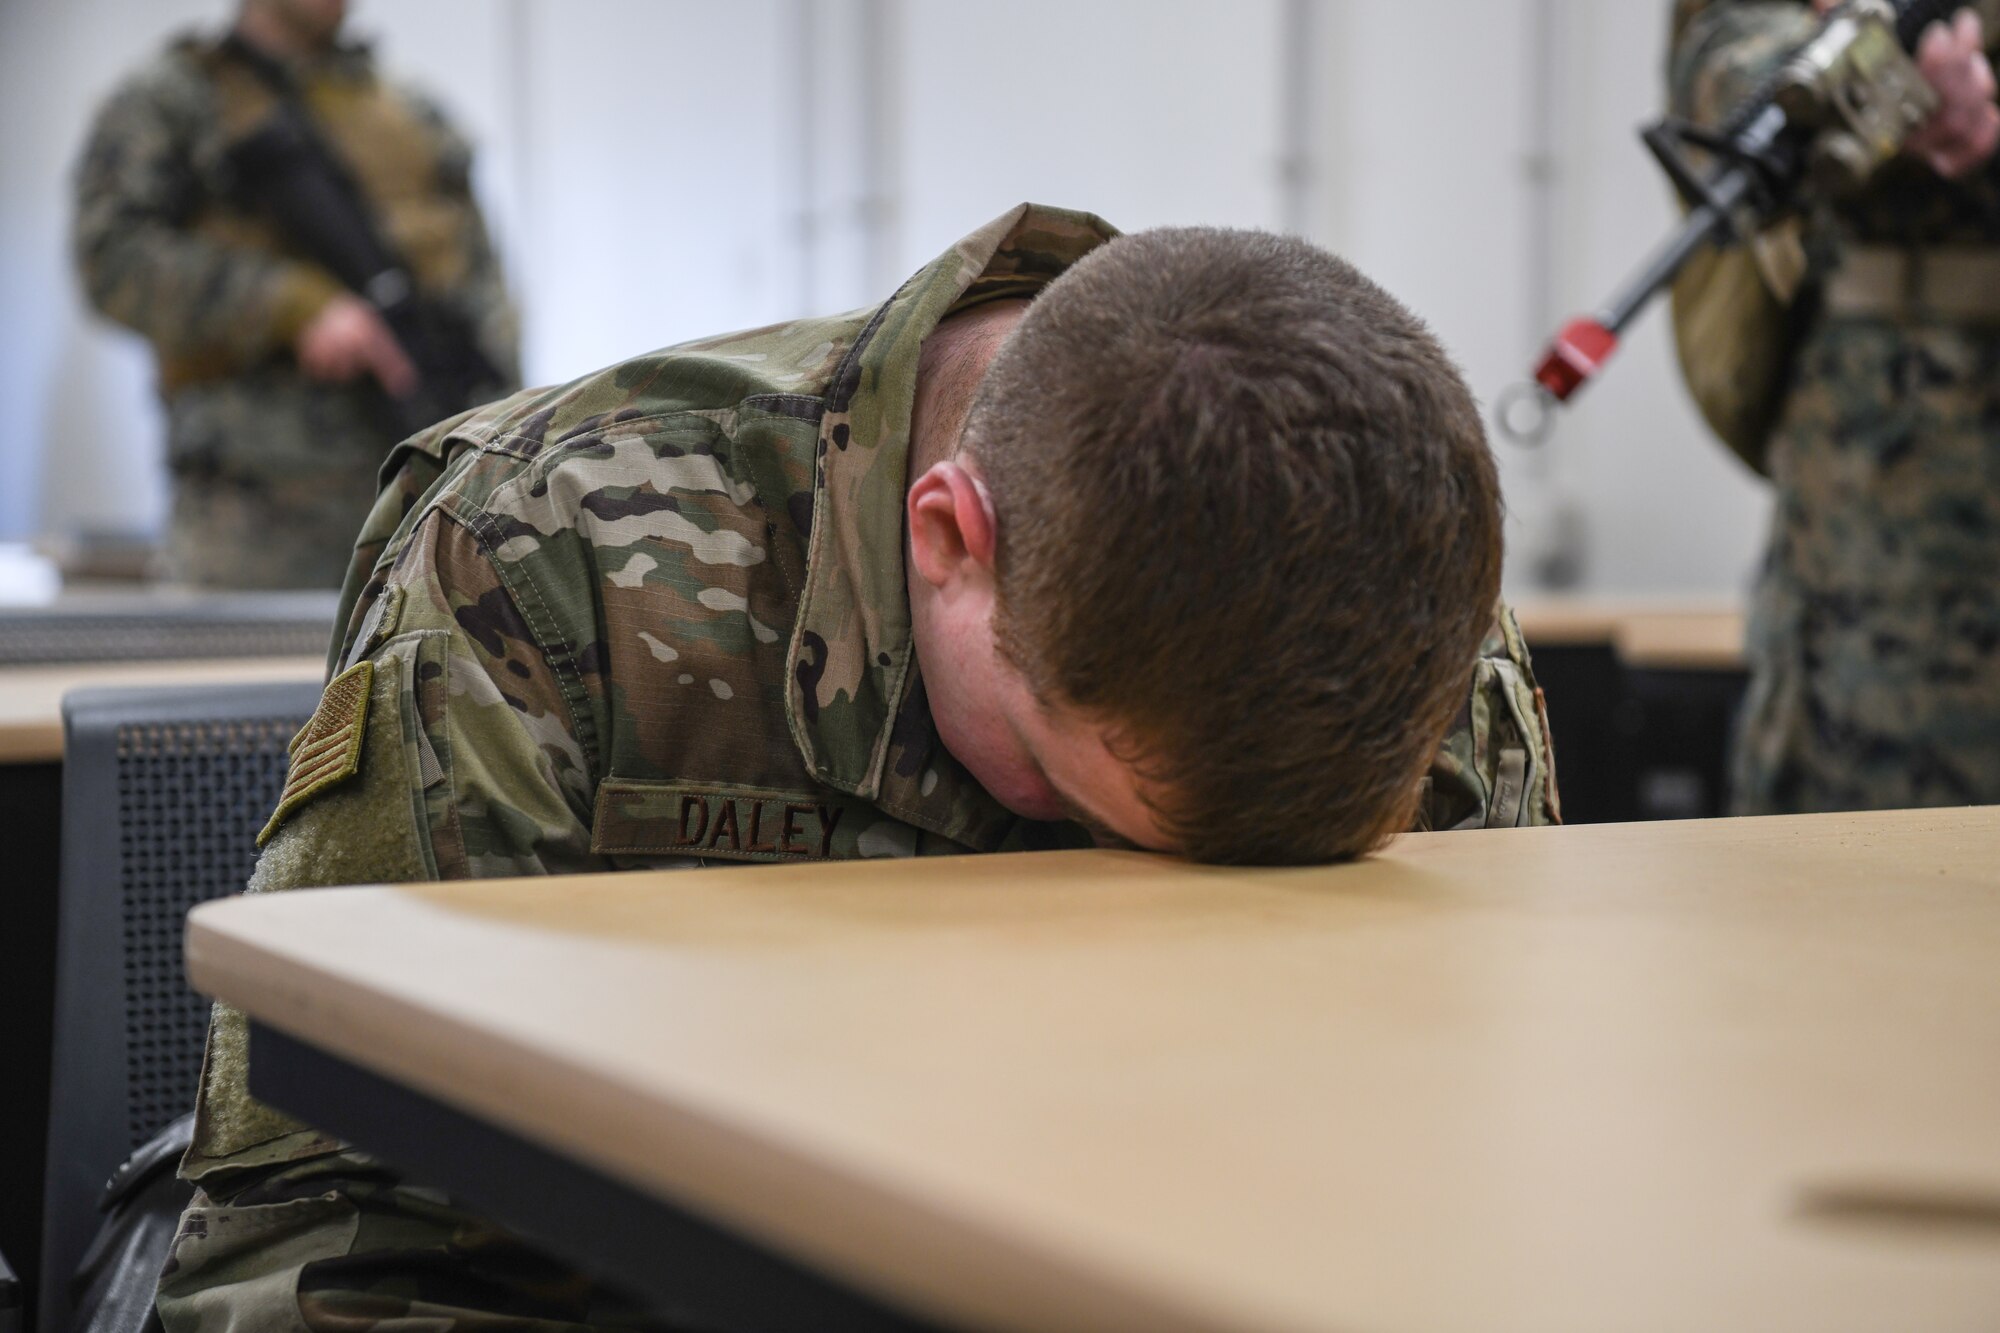 Staff Sgt. Justin Daley, 445th Security Forces Squadron, holds his head against a desk as an acting ‘detainee’ during a training exercise at the Warfighter Training Center here March 6th, 2021, Wright-Patterson Air Force Base, Ohio. Marines from Charlie Company, 4th Law Enforcement Battalion and Airmen from the 445th Security Forces Squadron participated in the detainee operations training adding elements of experience from each branch of service providing total force integration.